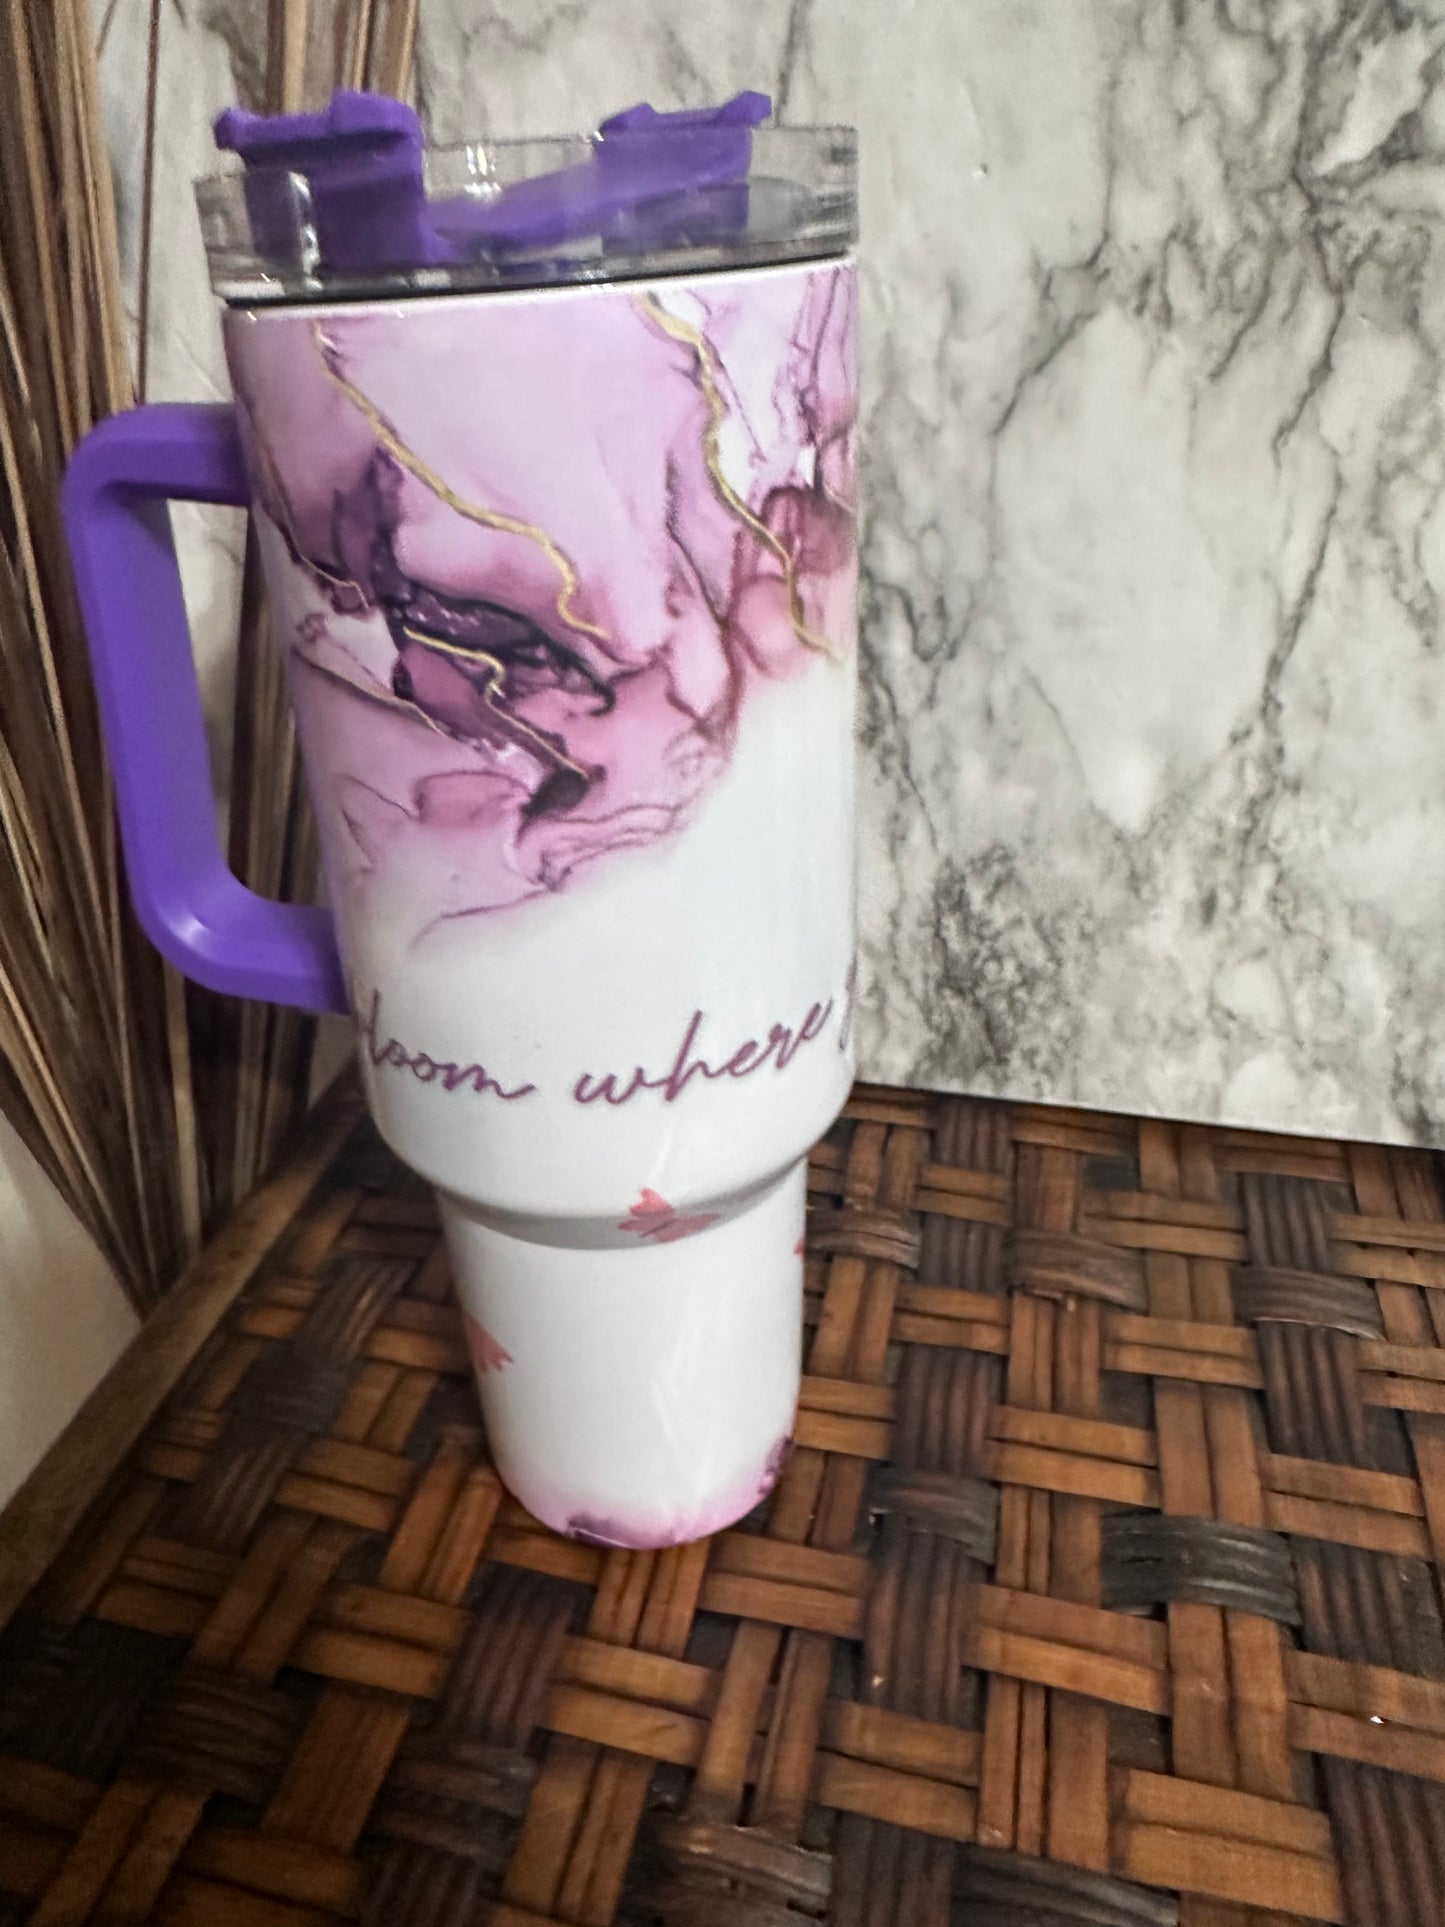 Bloom where you are planted (purple) 40oz Tumblers Cups